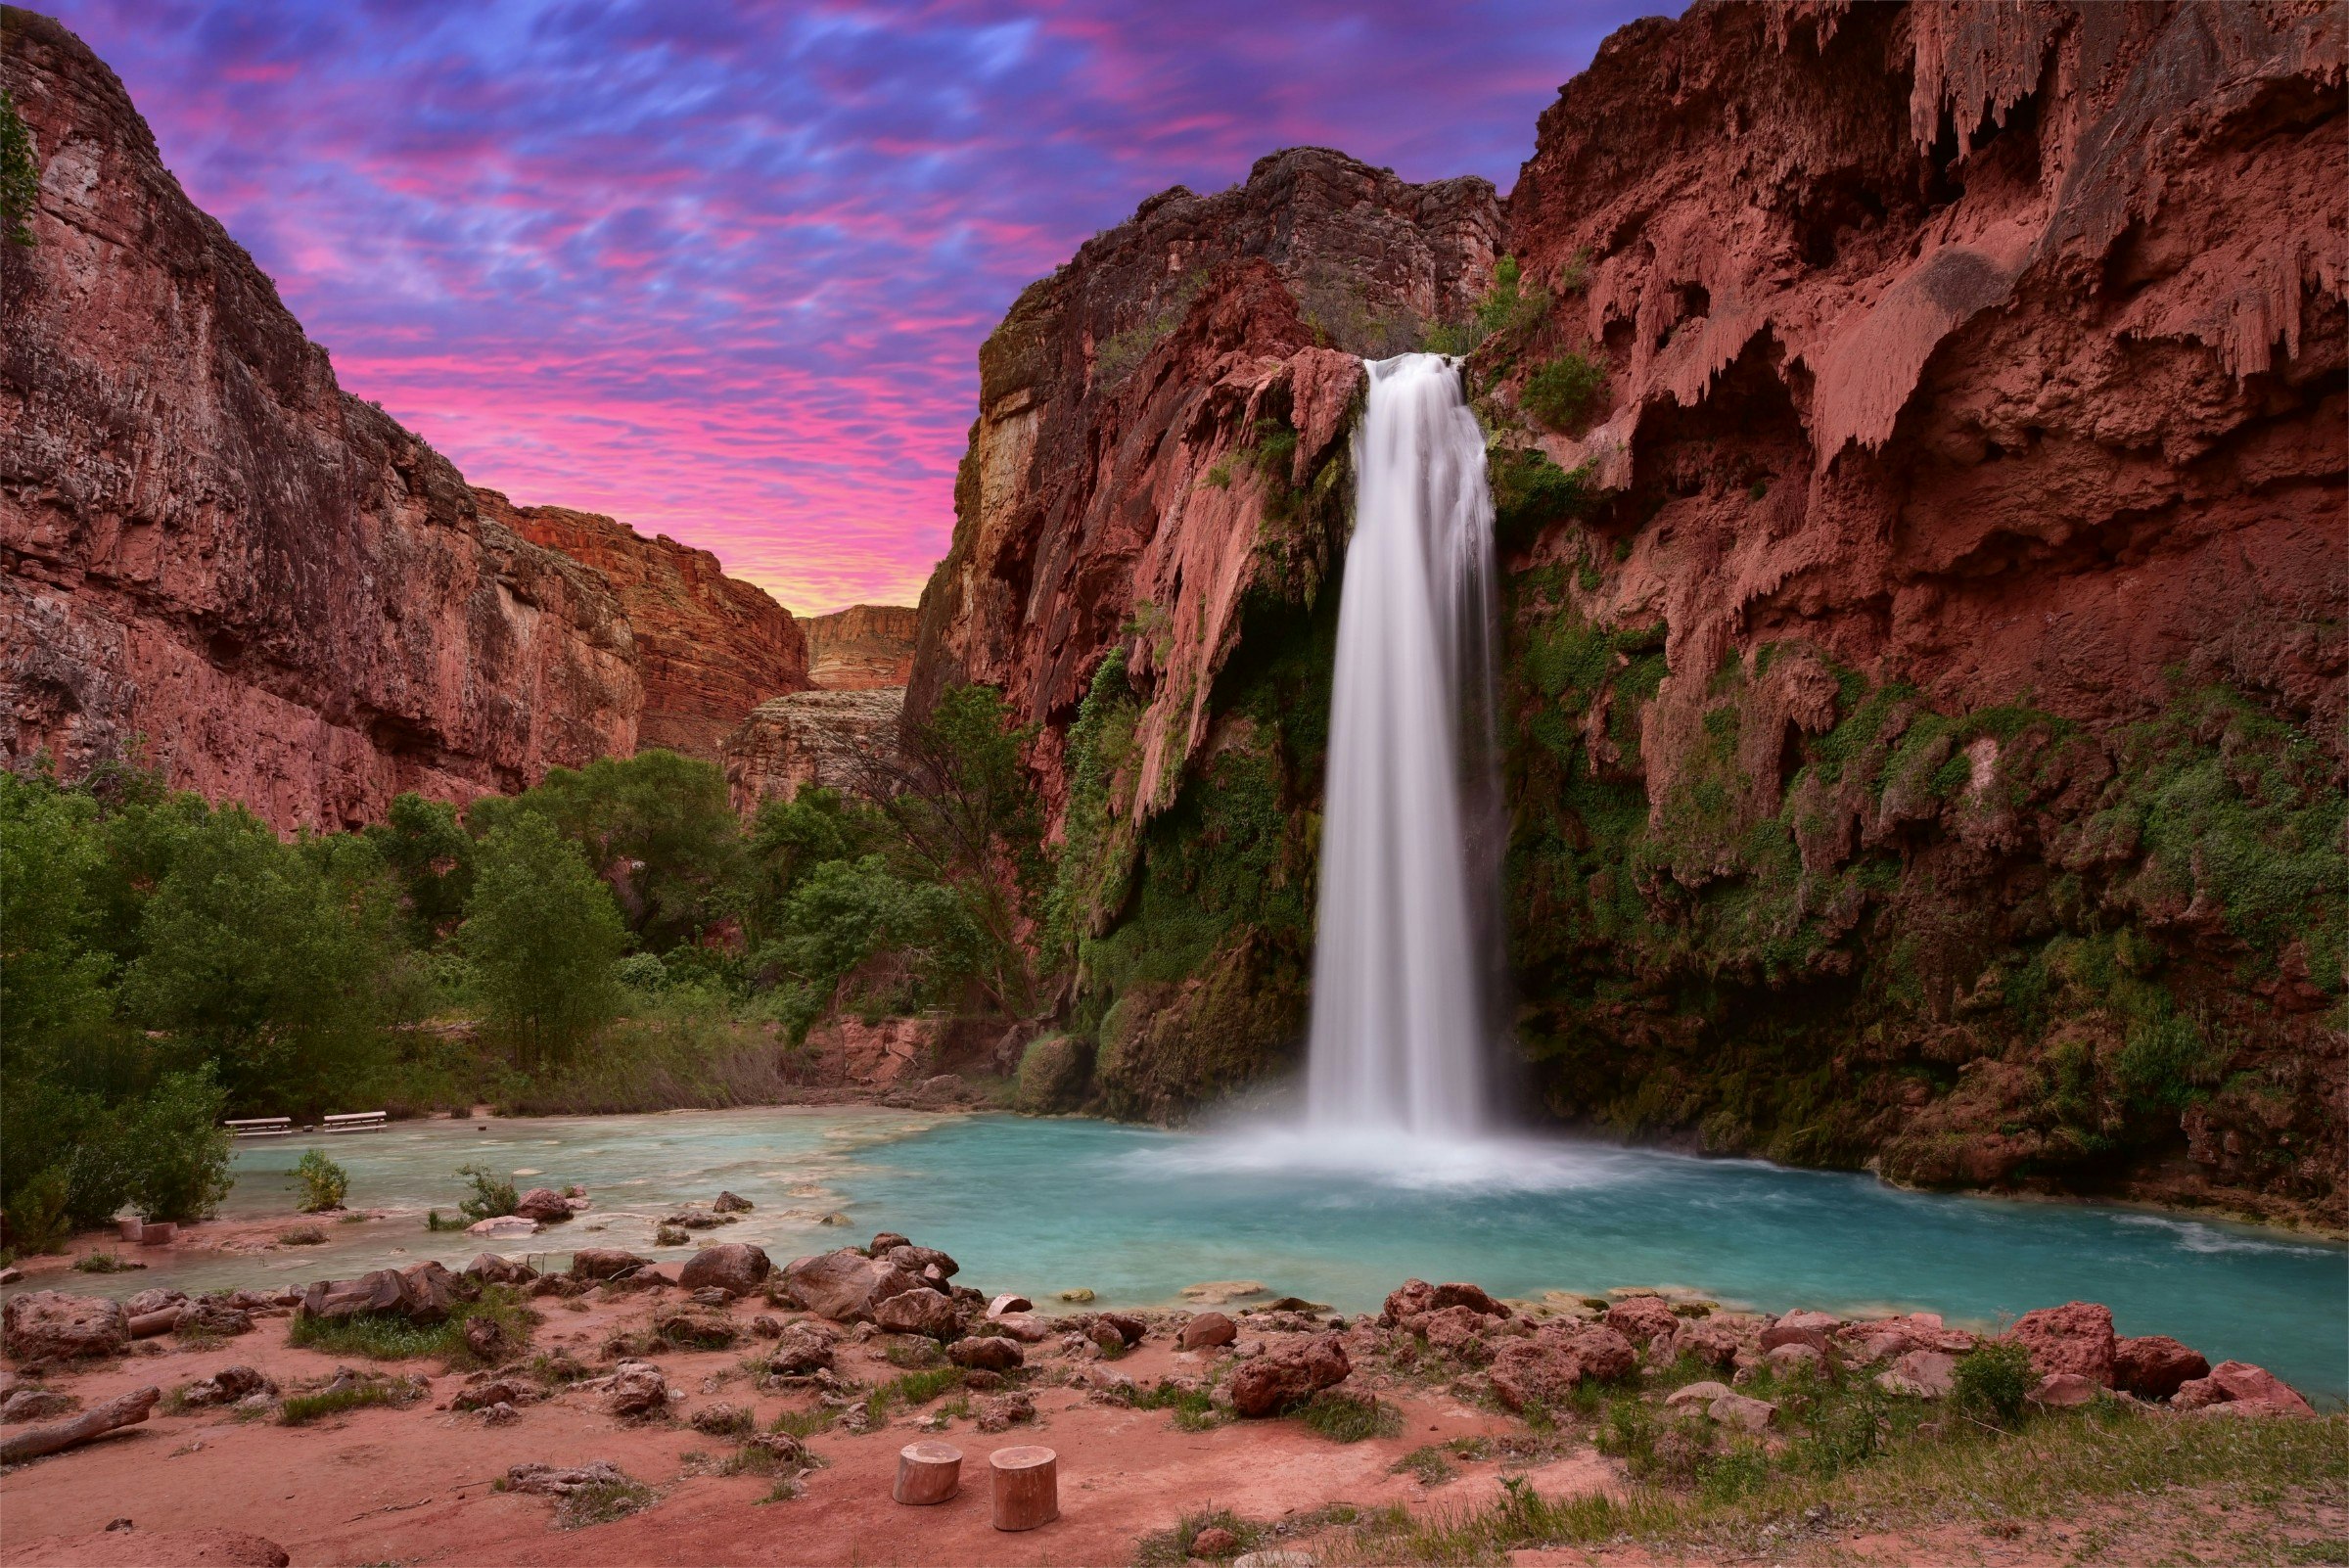 Here's how to get a permit to visit the incredible Havasu Falls